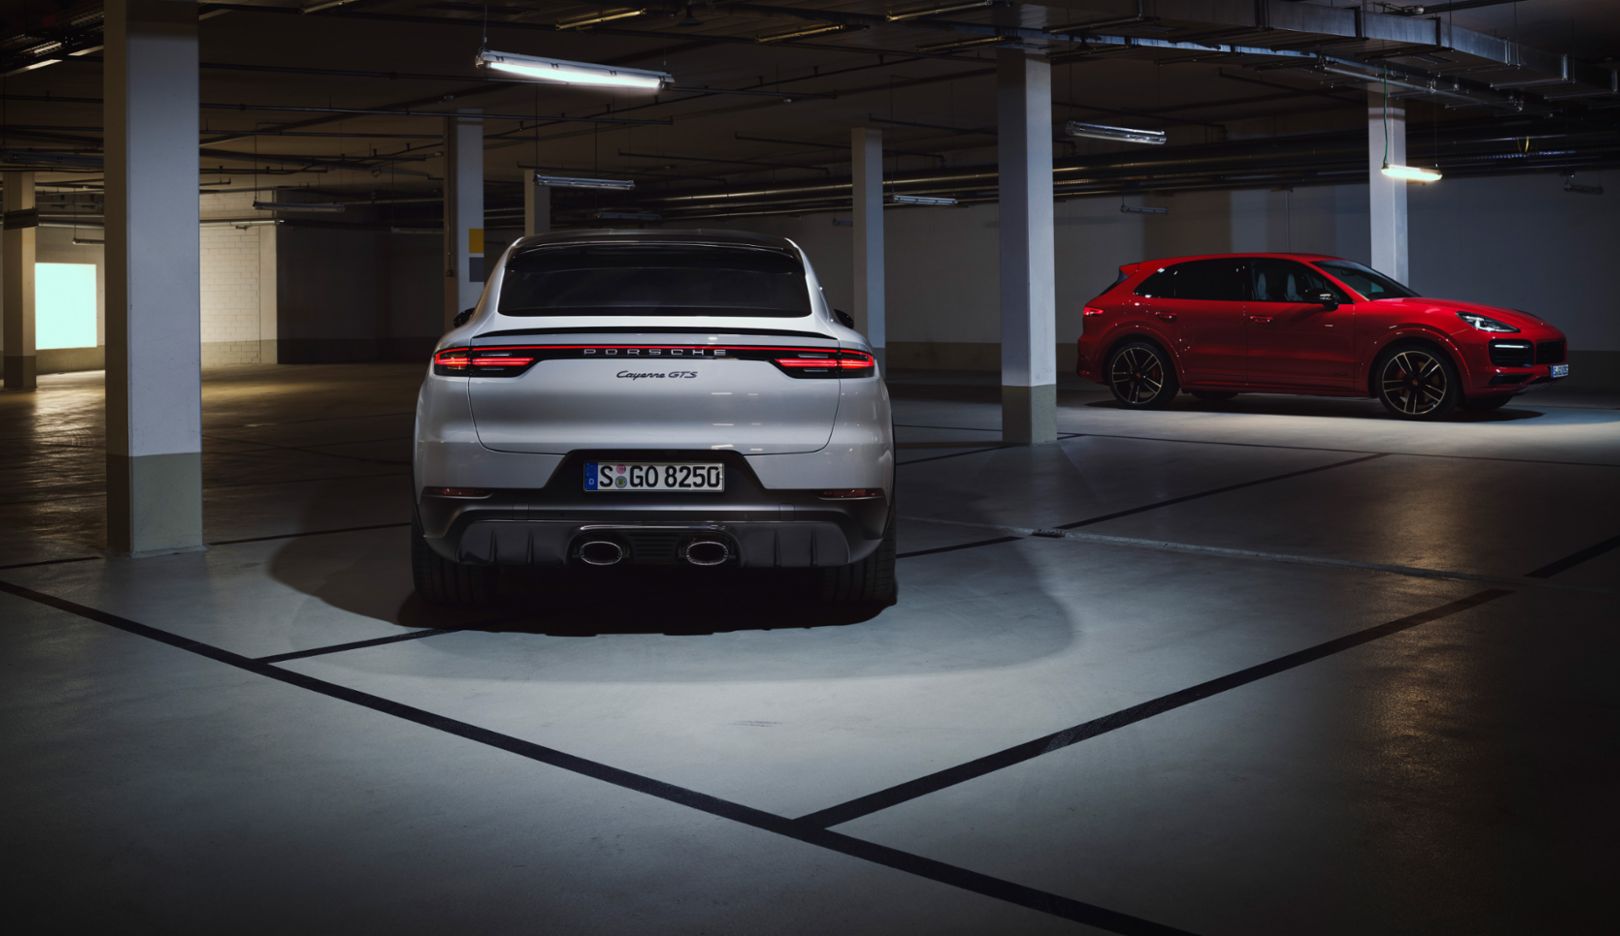 The new Cayenne GTS models - all highlights